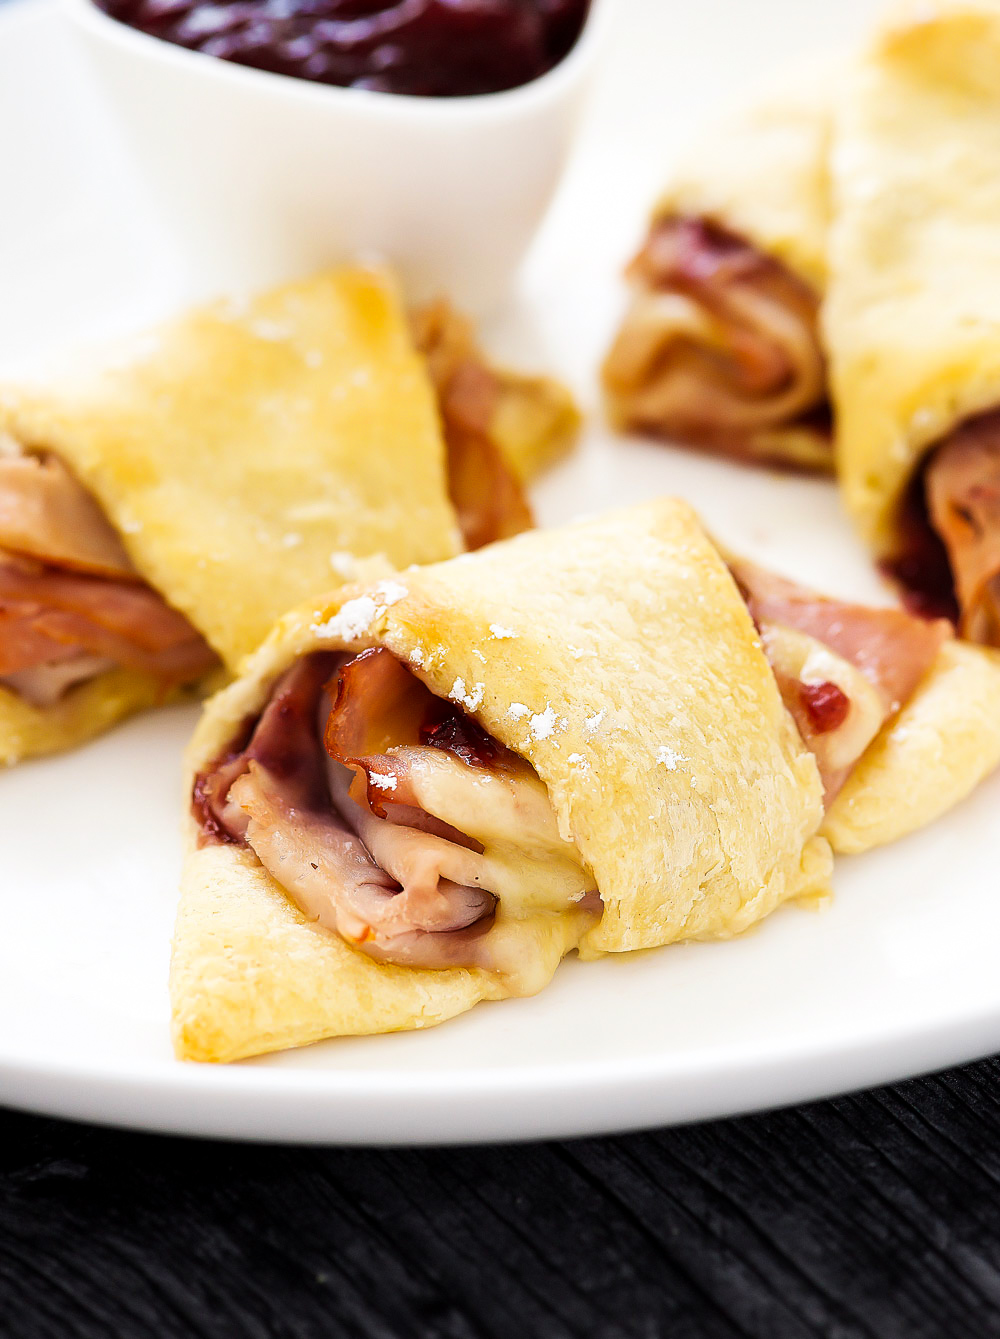 Ham, turkey and muenster cheese wrapped in flaky crescent dough. Life-in-the-Lofthouse.com